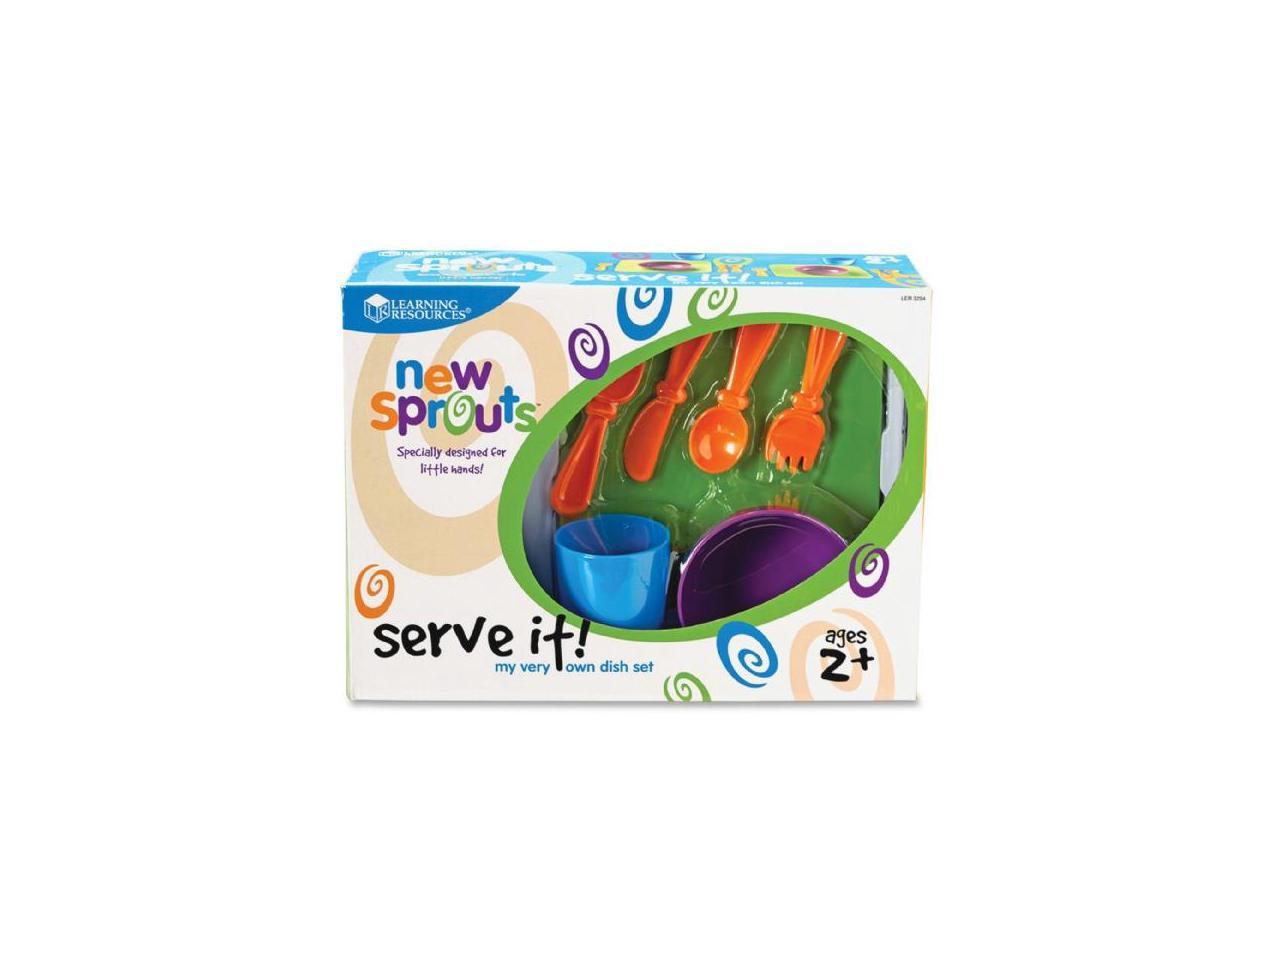 LEARNING RESOURCES NEW SPROUTS SERVE IT DISHES 3294 